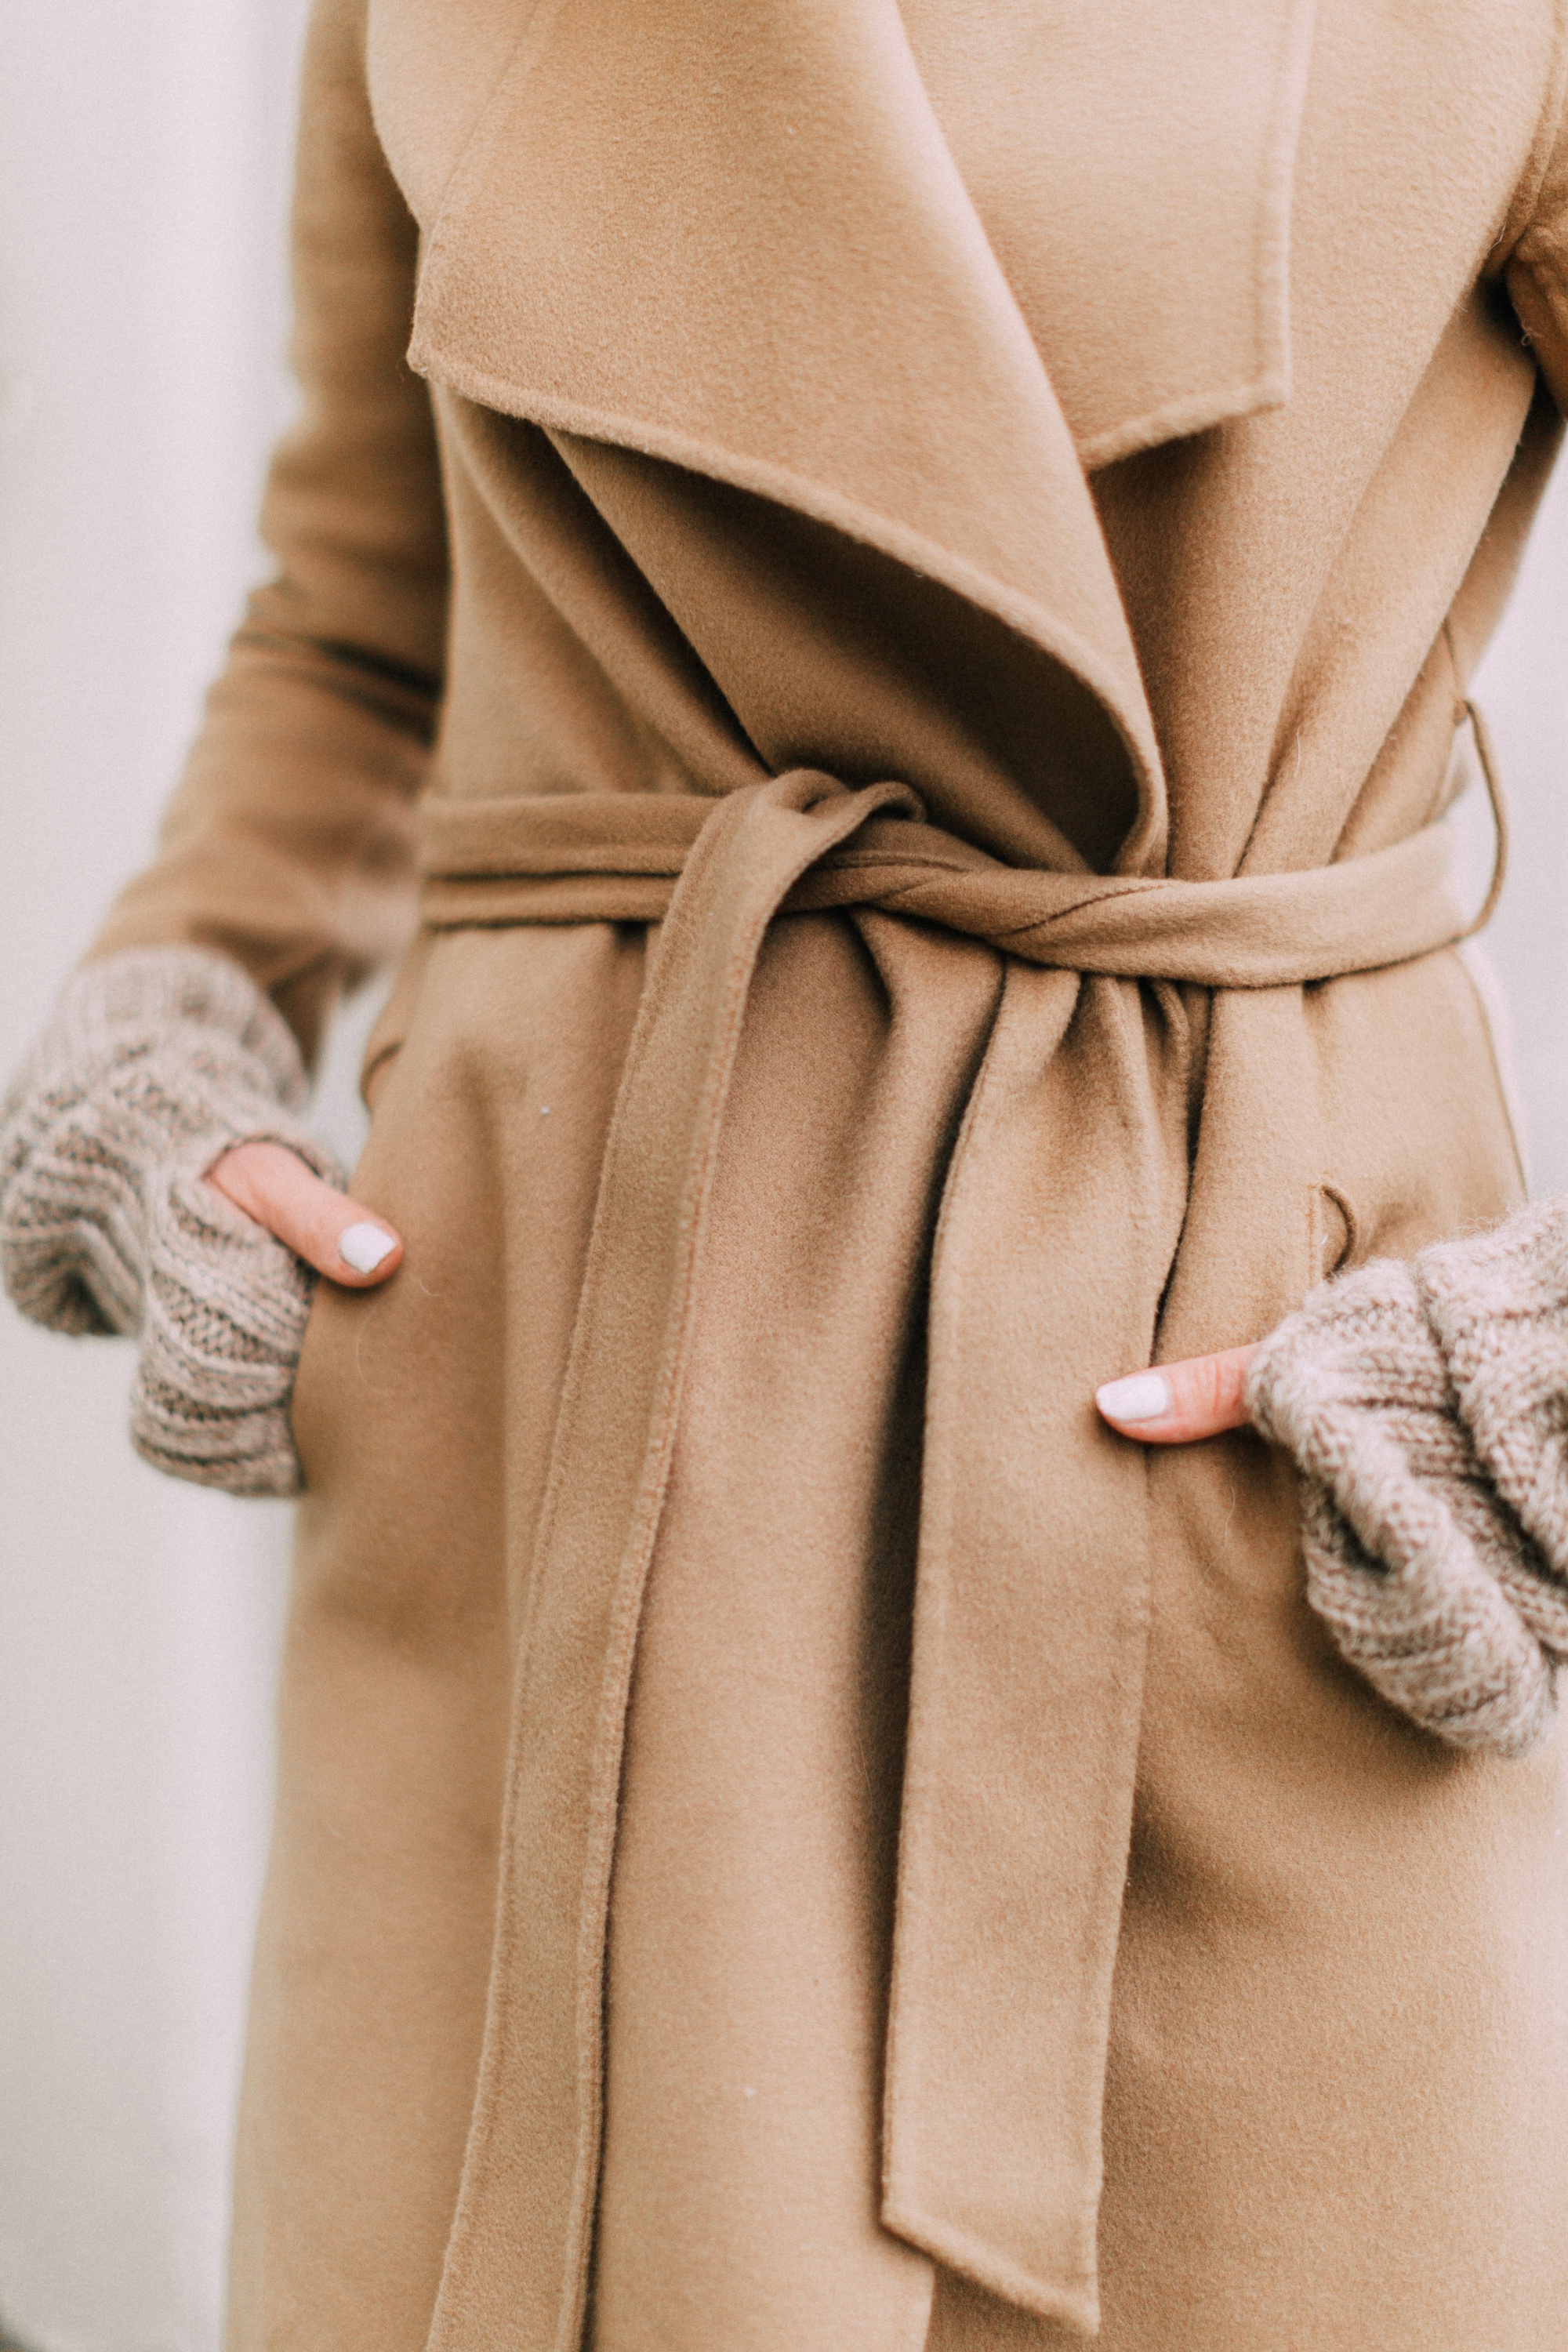 camel wrap coat by LINE the label called "The Meghan" after Meghan Markle